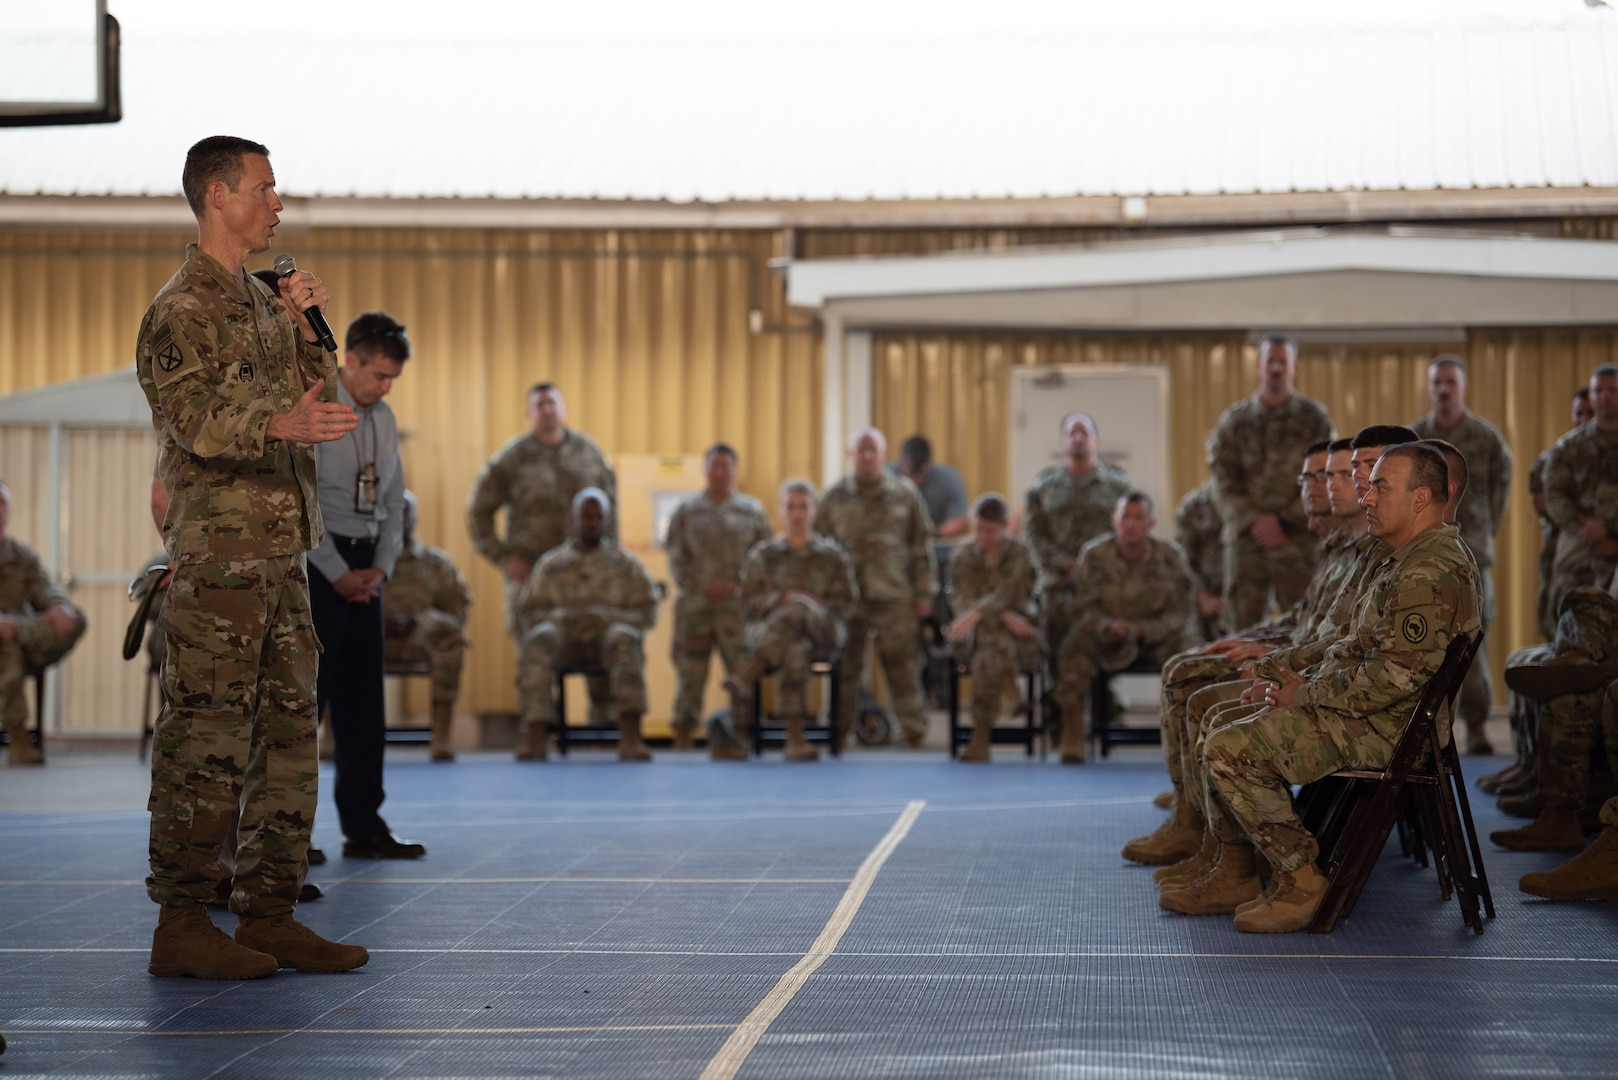 Members of the 404th Maneuver Enhancement Brigade listen to Maj. Gen. William Zana, commanding general of Combined Joint Task Force - Horn of Africa